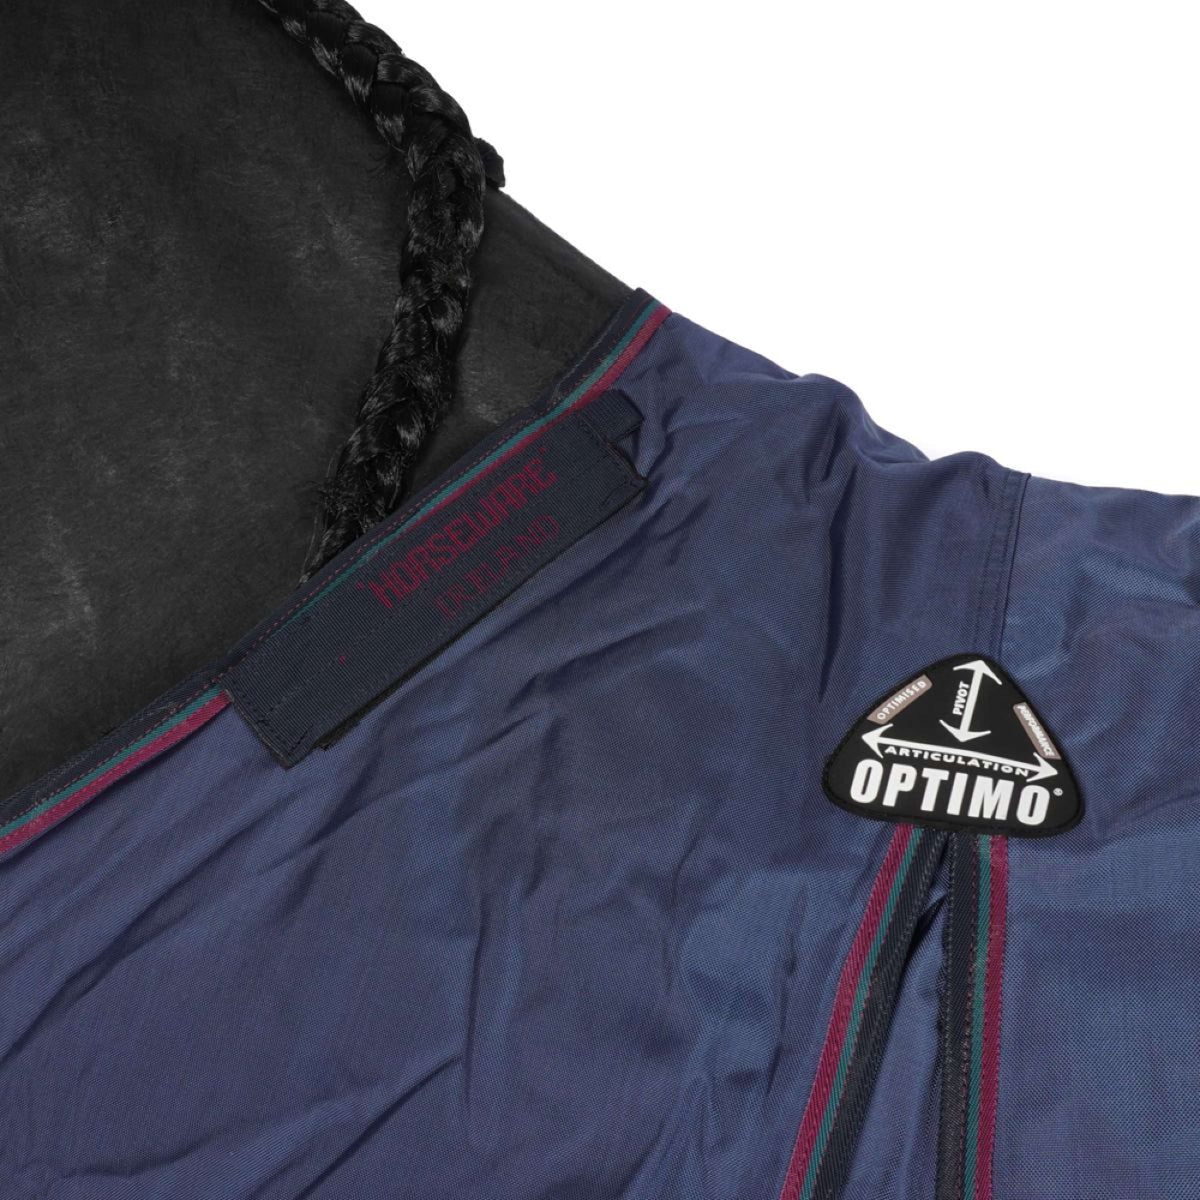 Rambo Optimo Turnout Outer Only Navy/Burgund/Teal